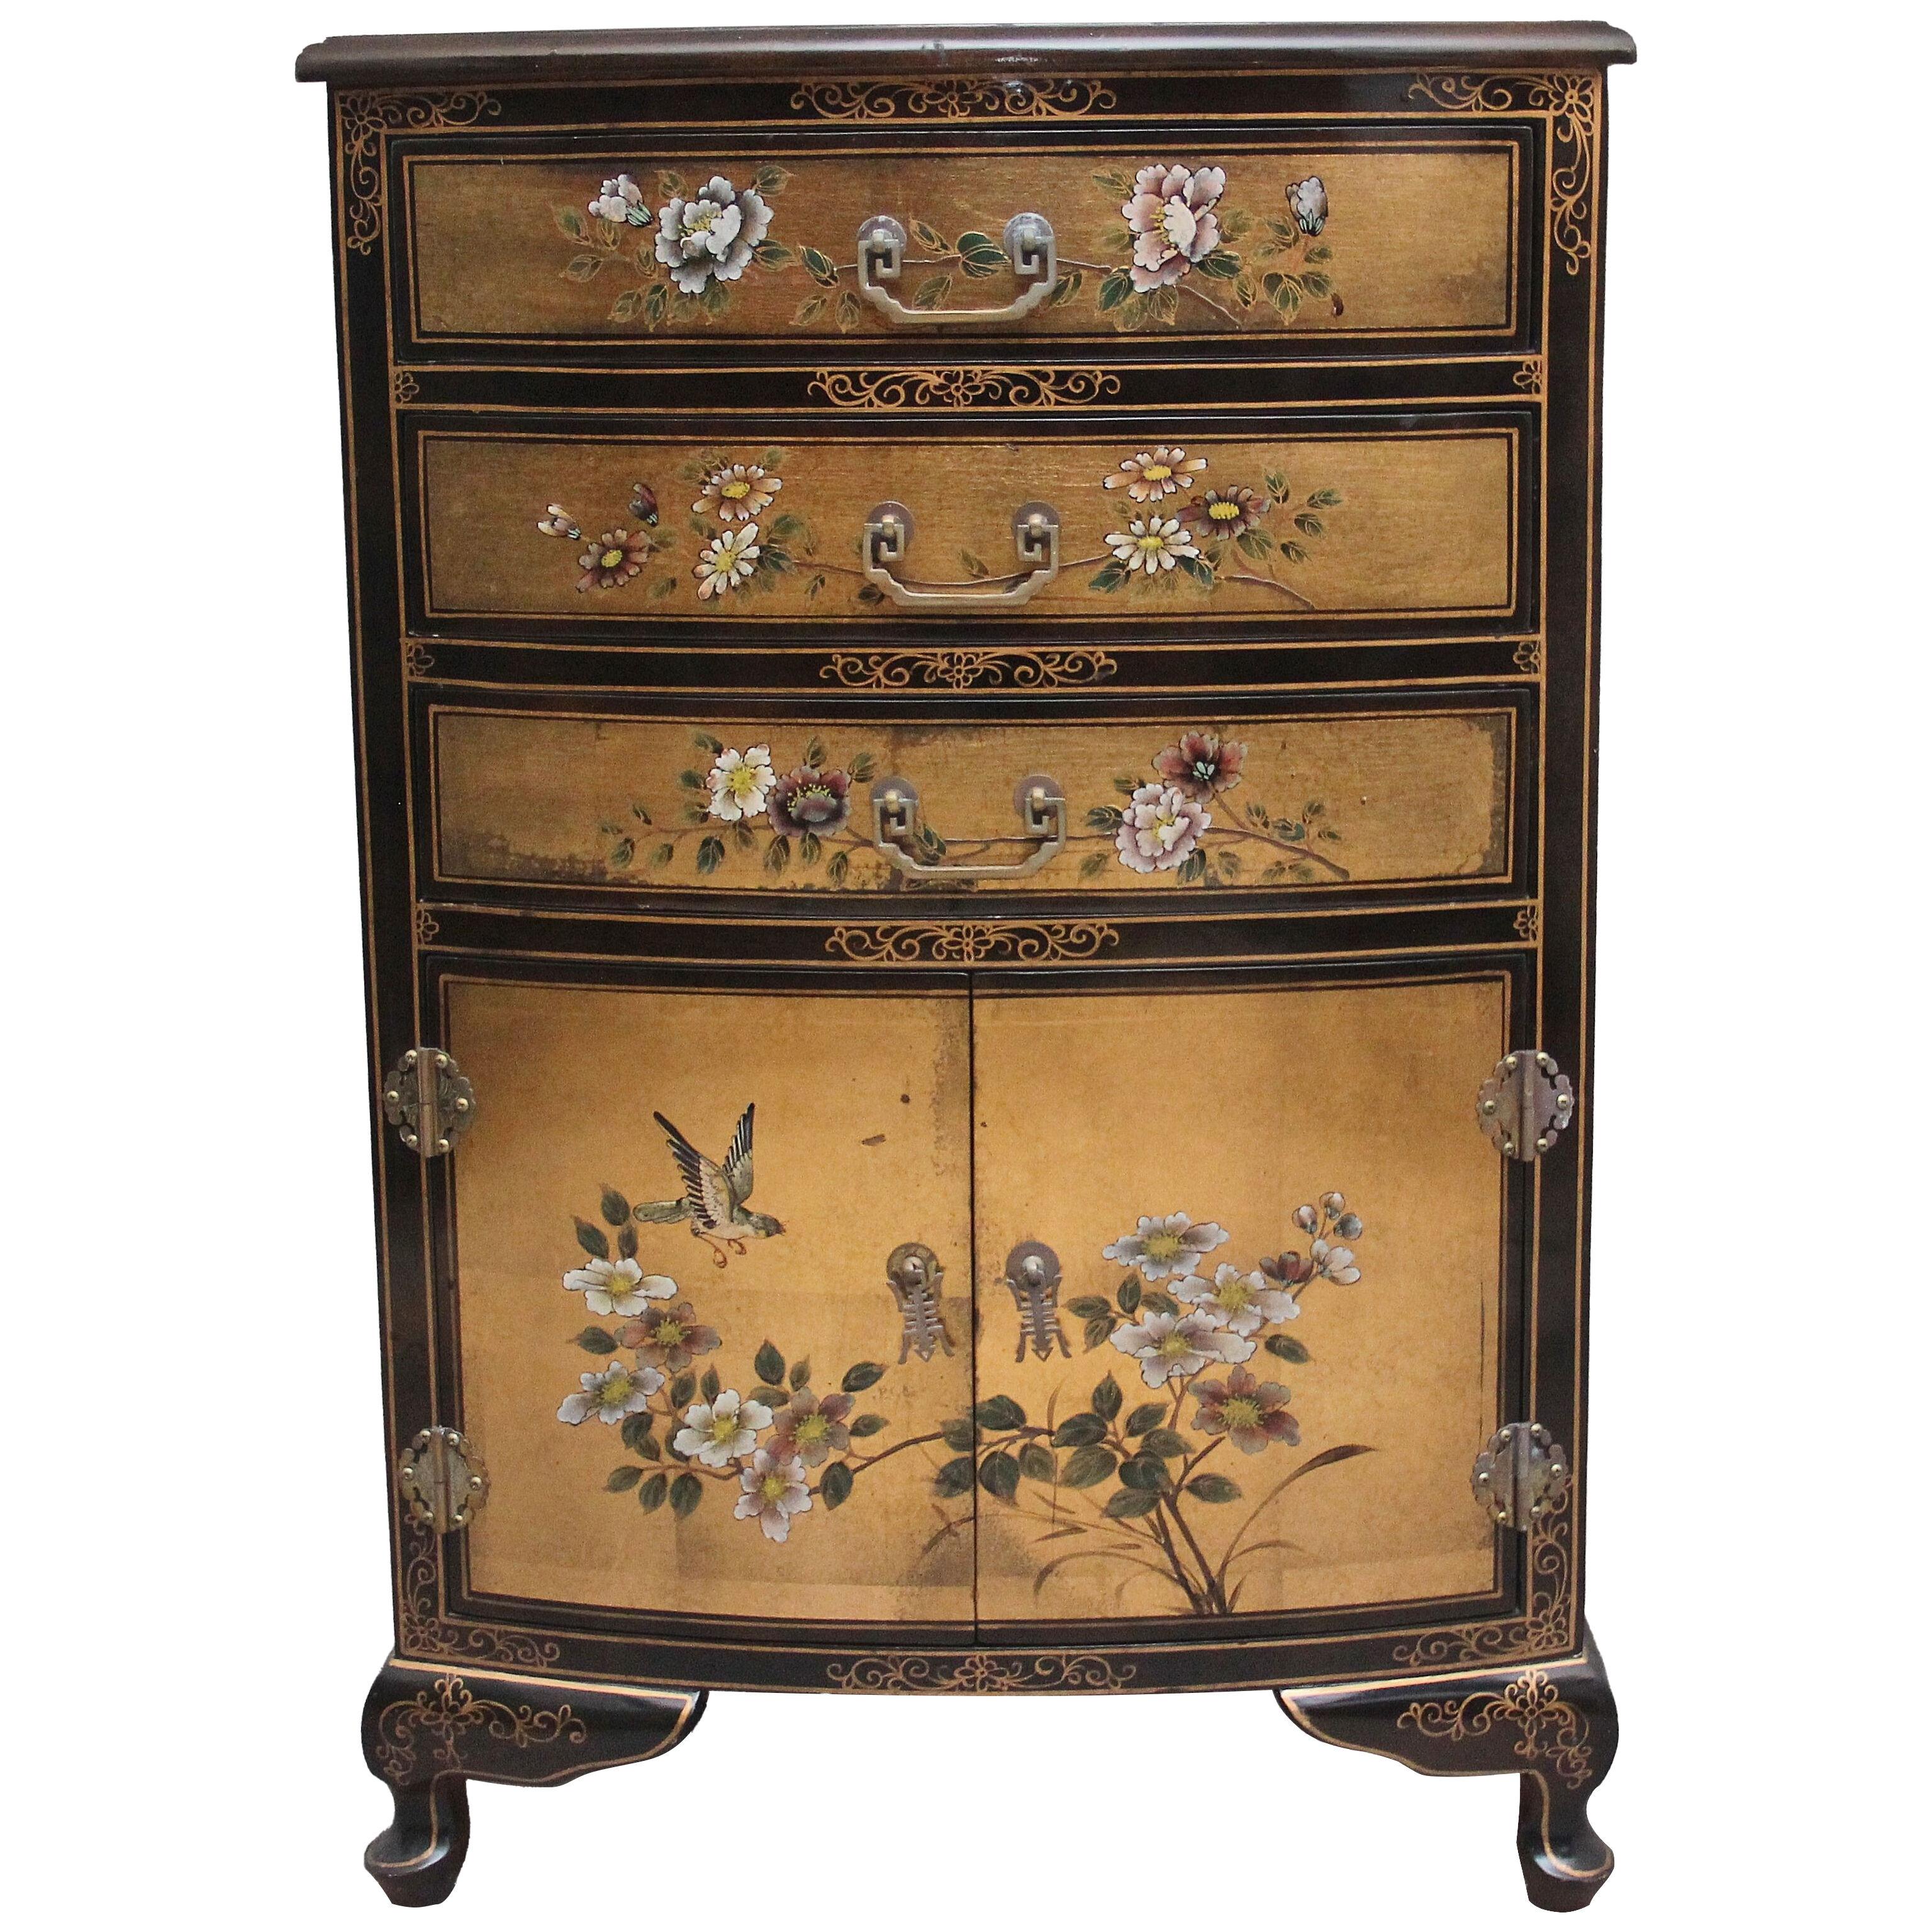 A decorative mid 20th Century painted and lacquered cabinet